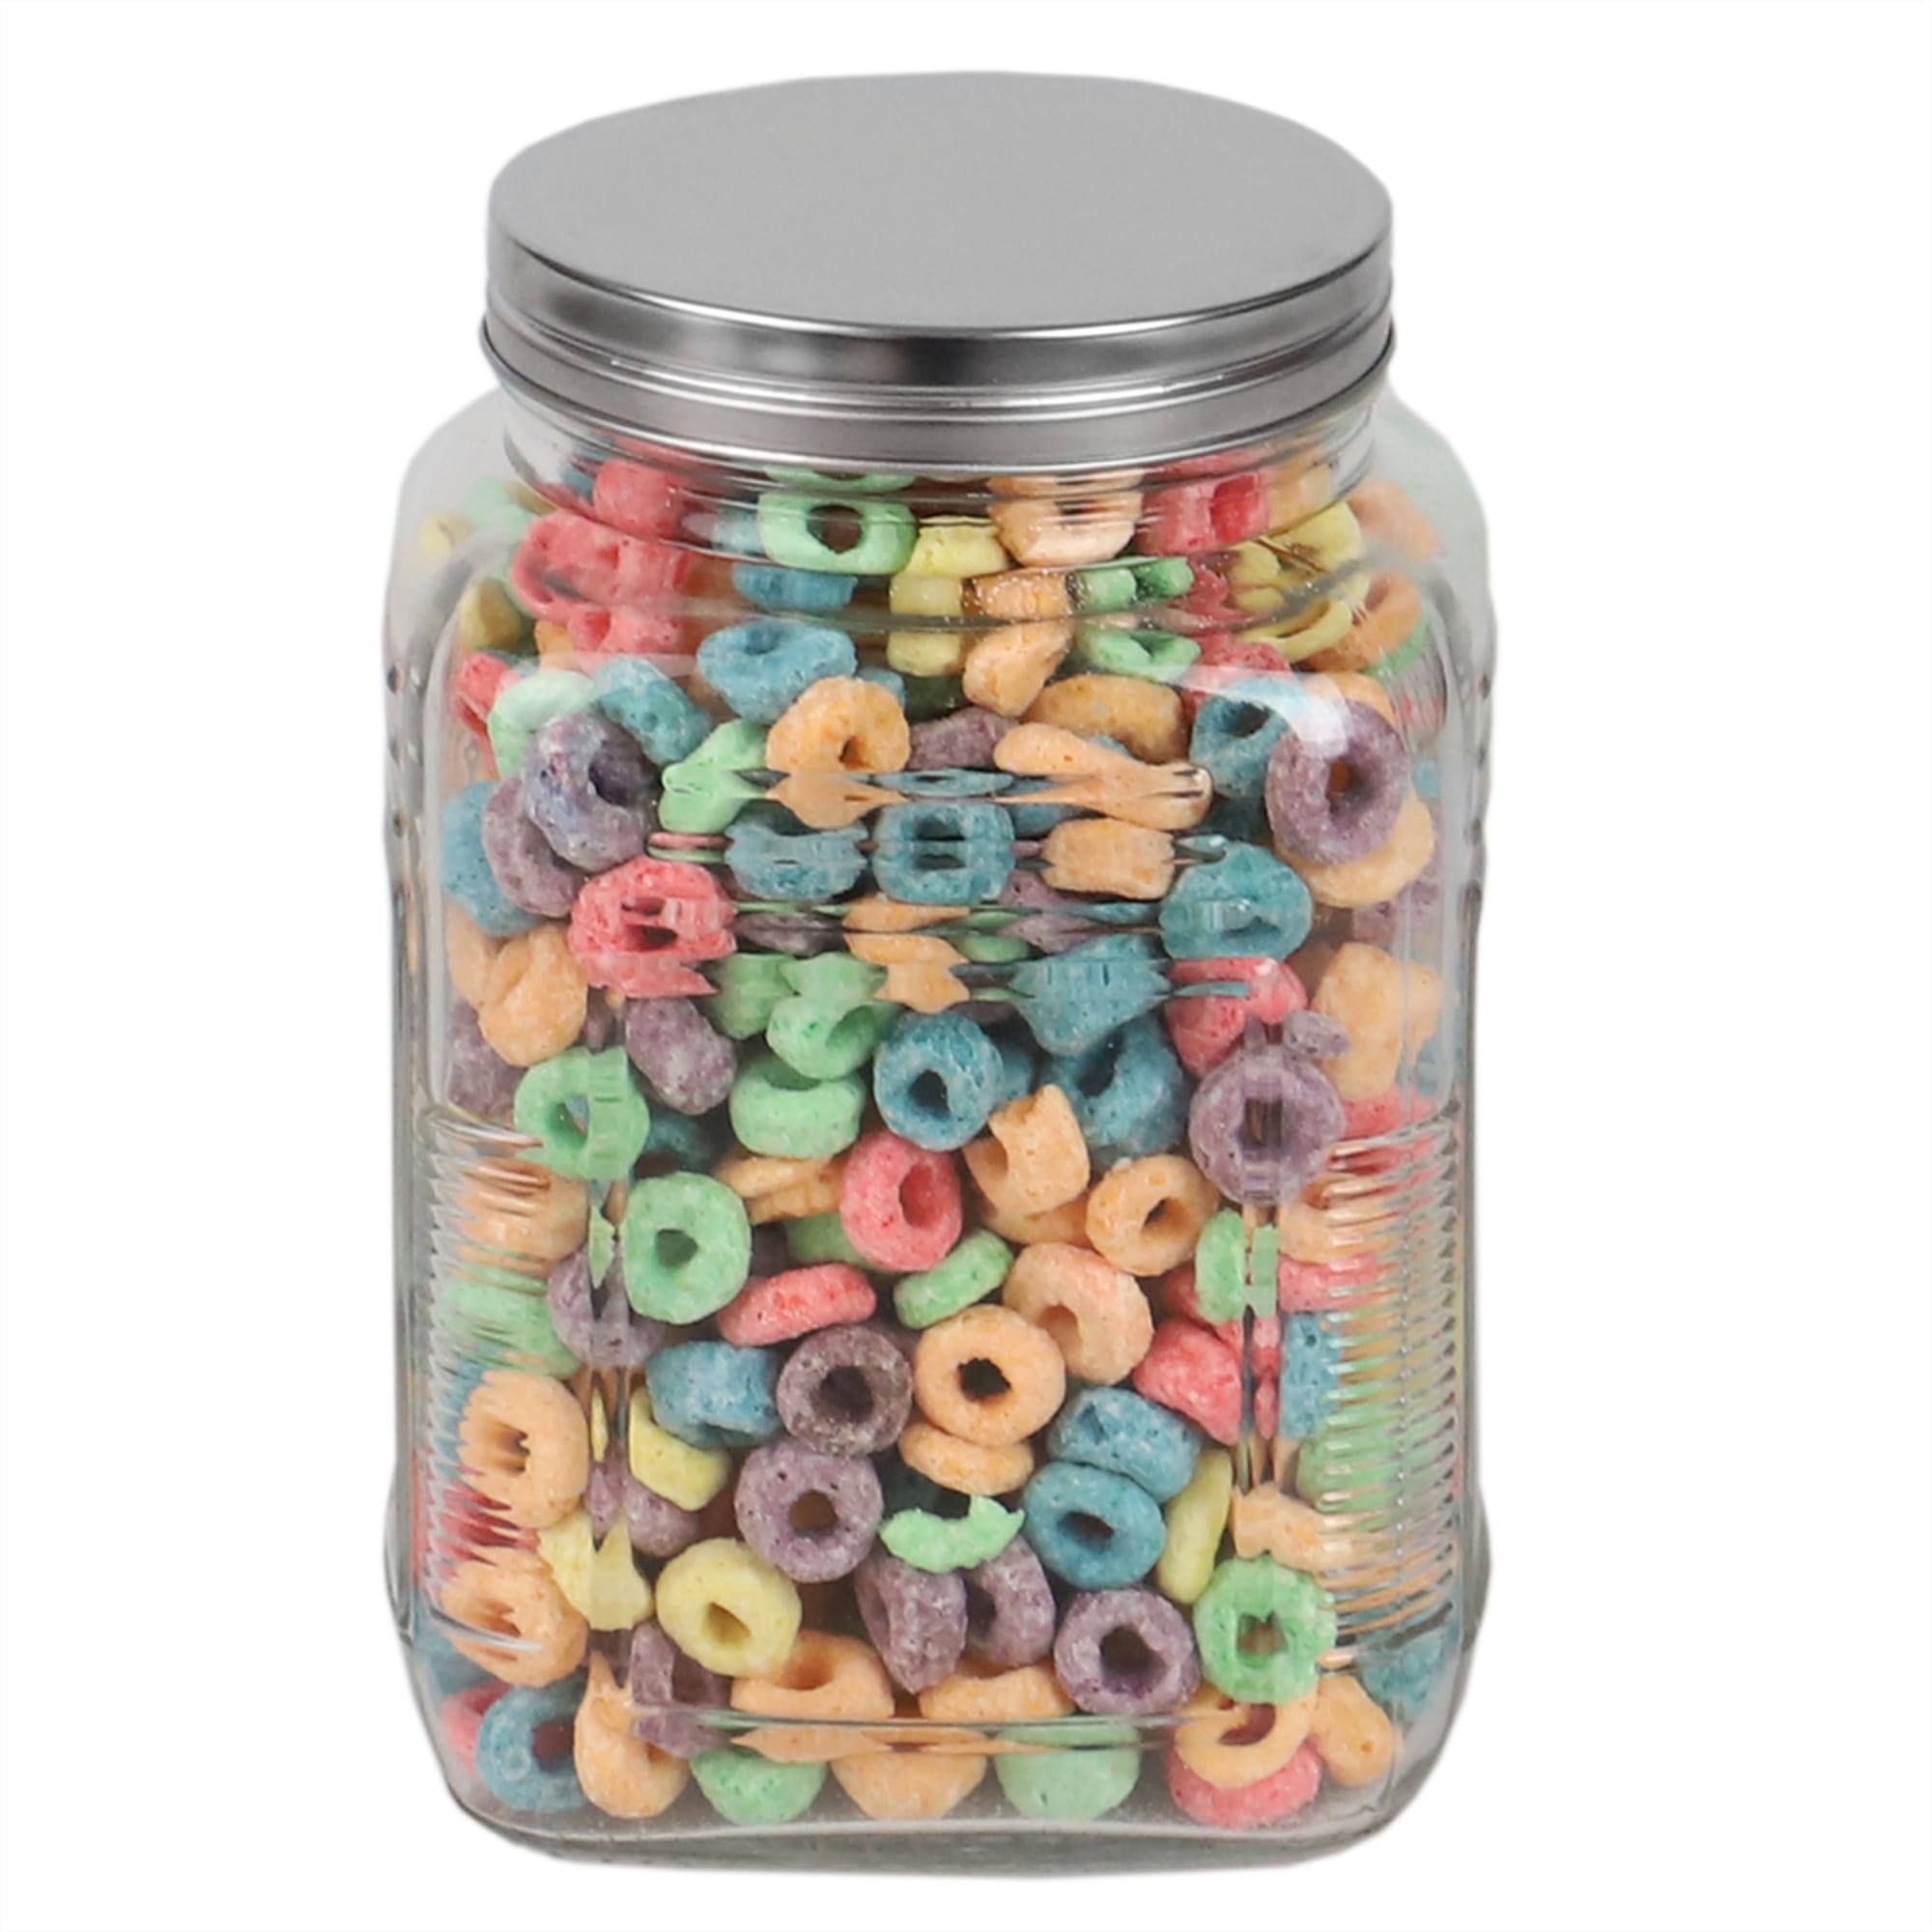 Home Basics Province 1.5 Lt Glass Canister with Metal Lid $2.50 EACH, CASE PACK OF 12